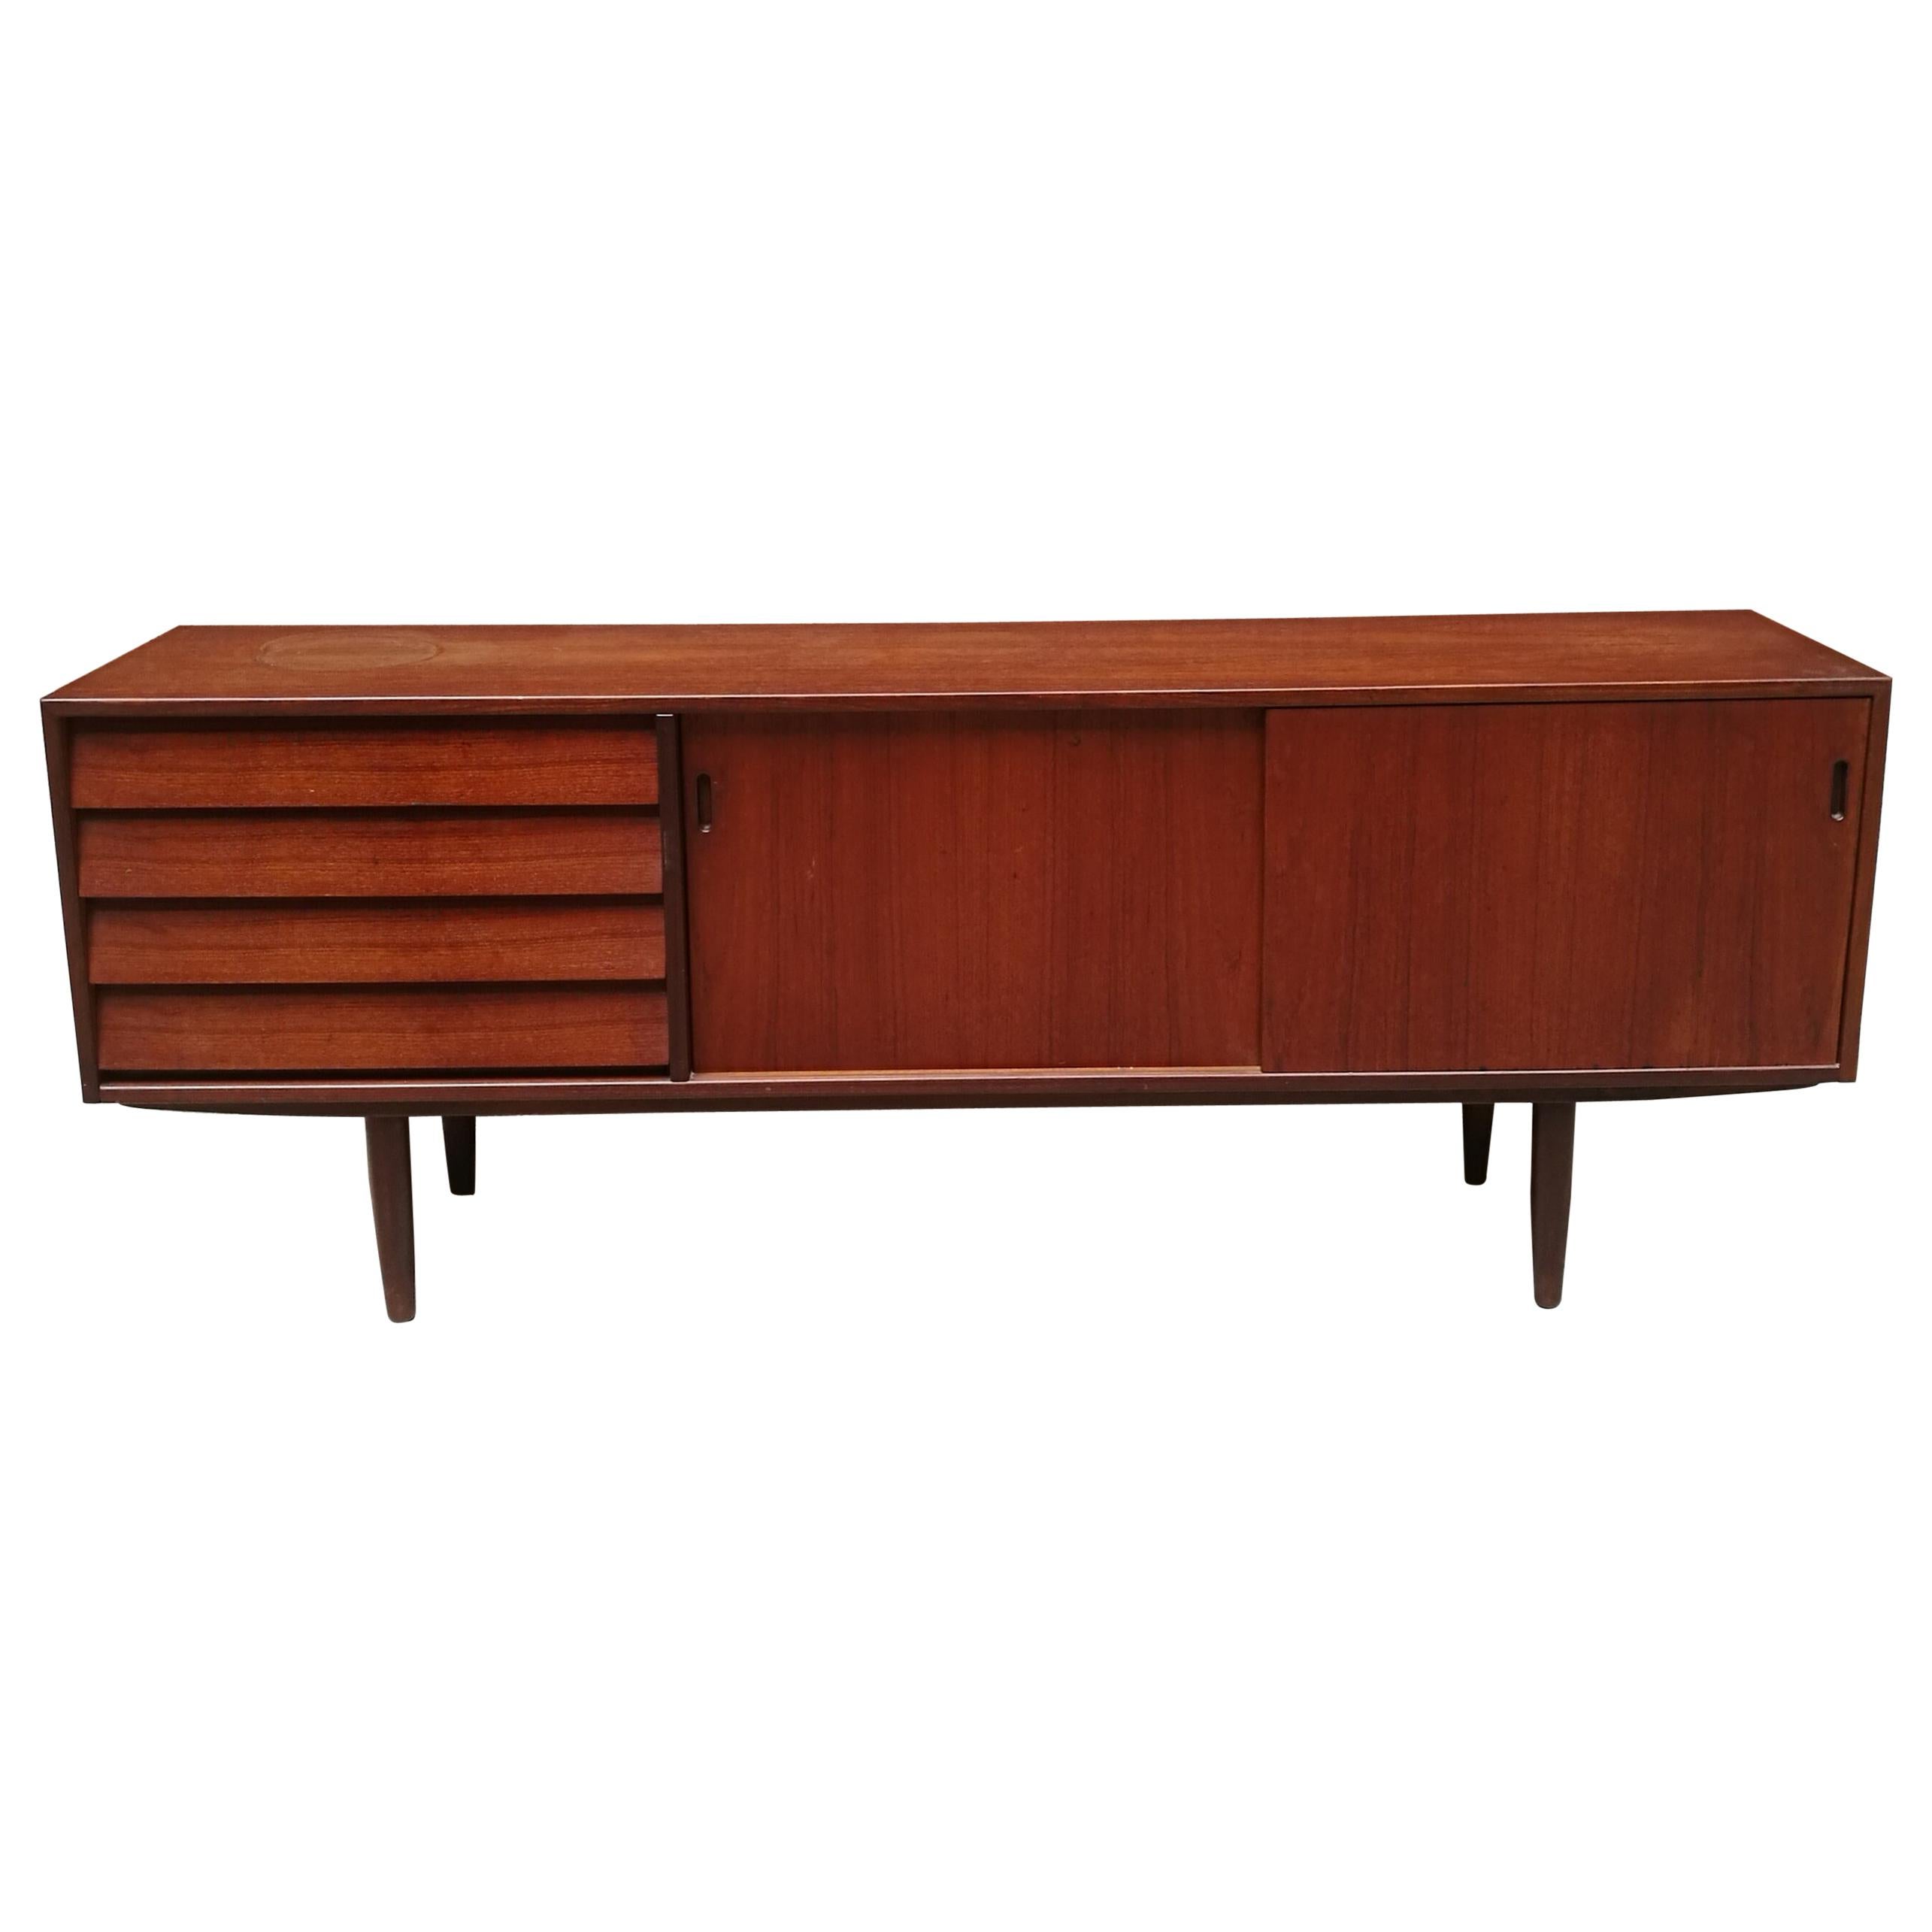 Amazing Sideboard in Teak with Drawers and Sliding Doors 1960 Denmark